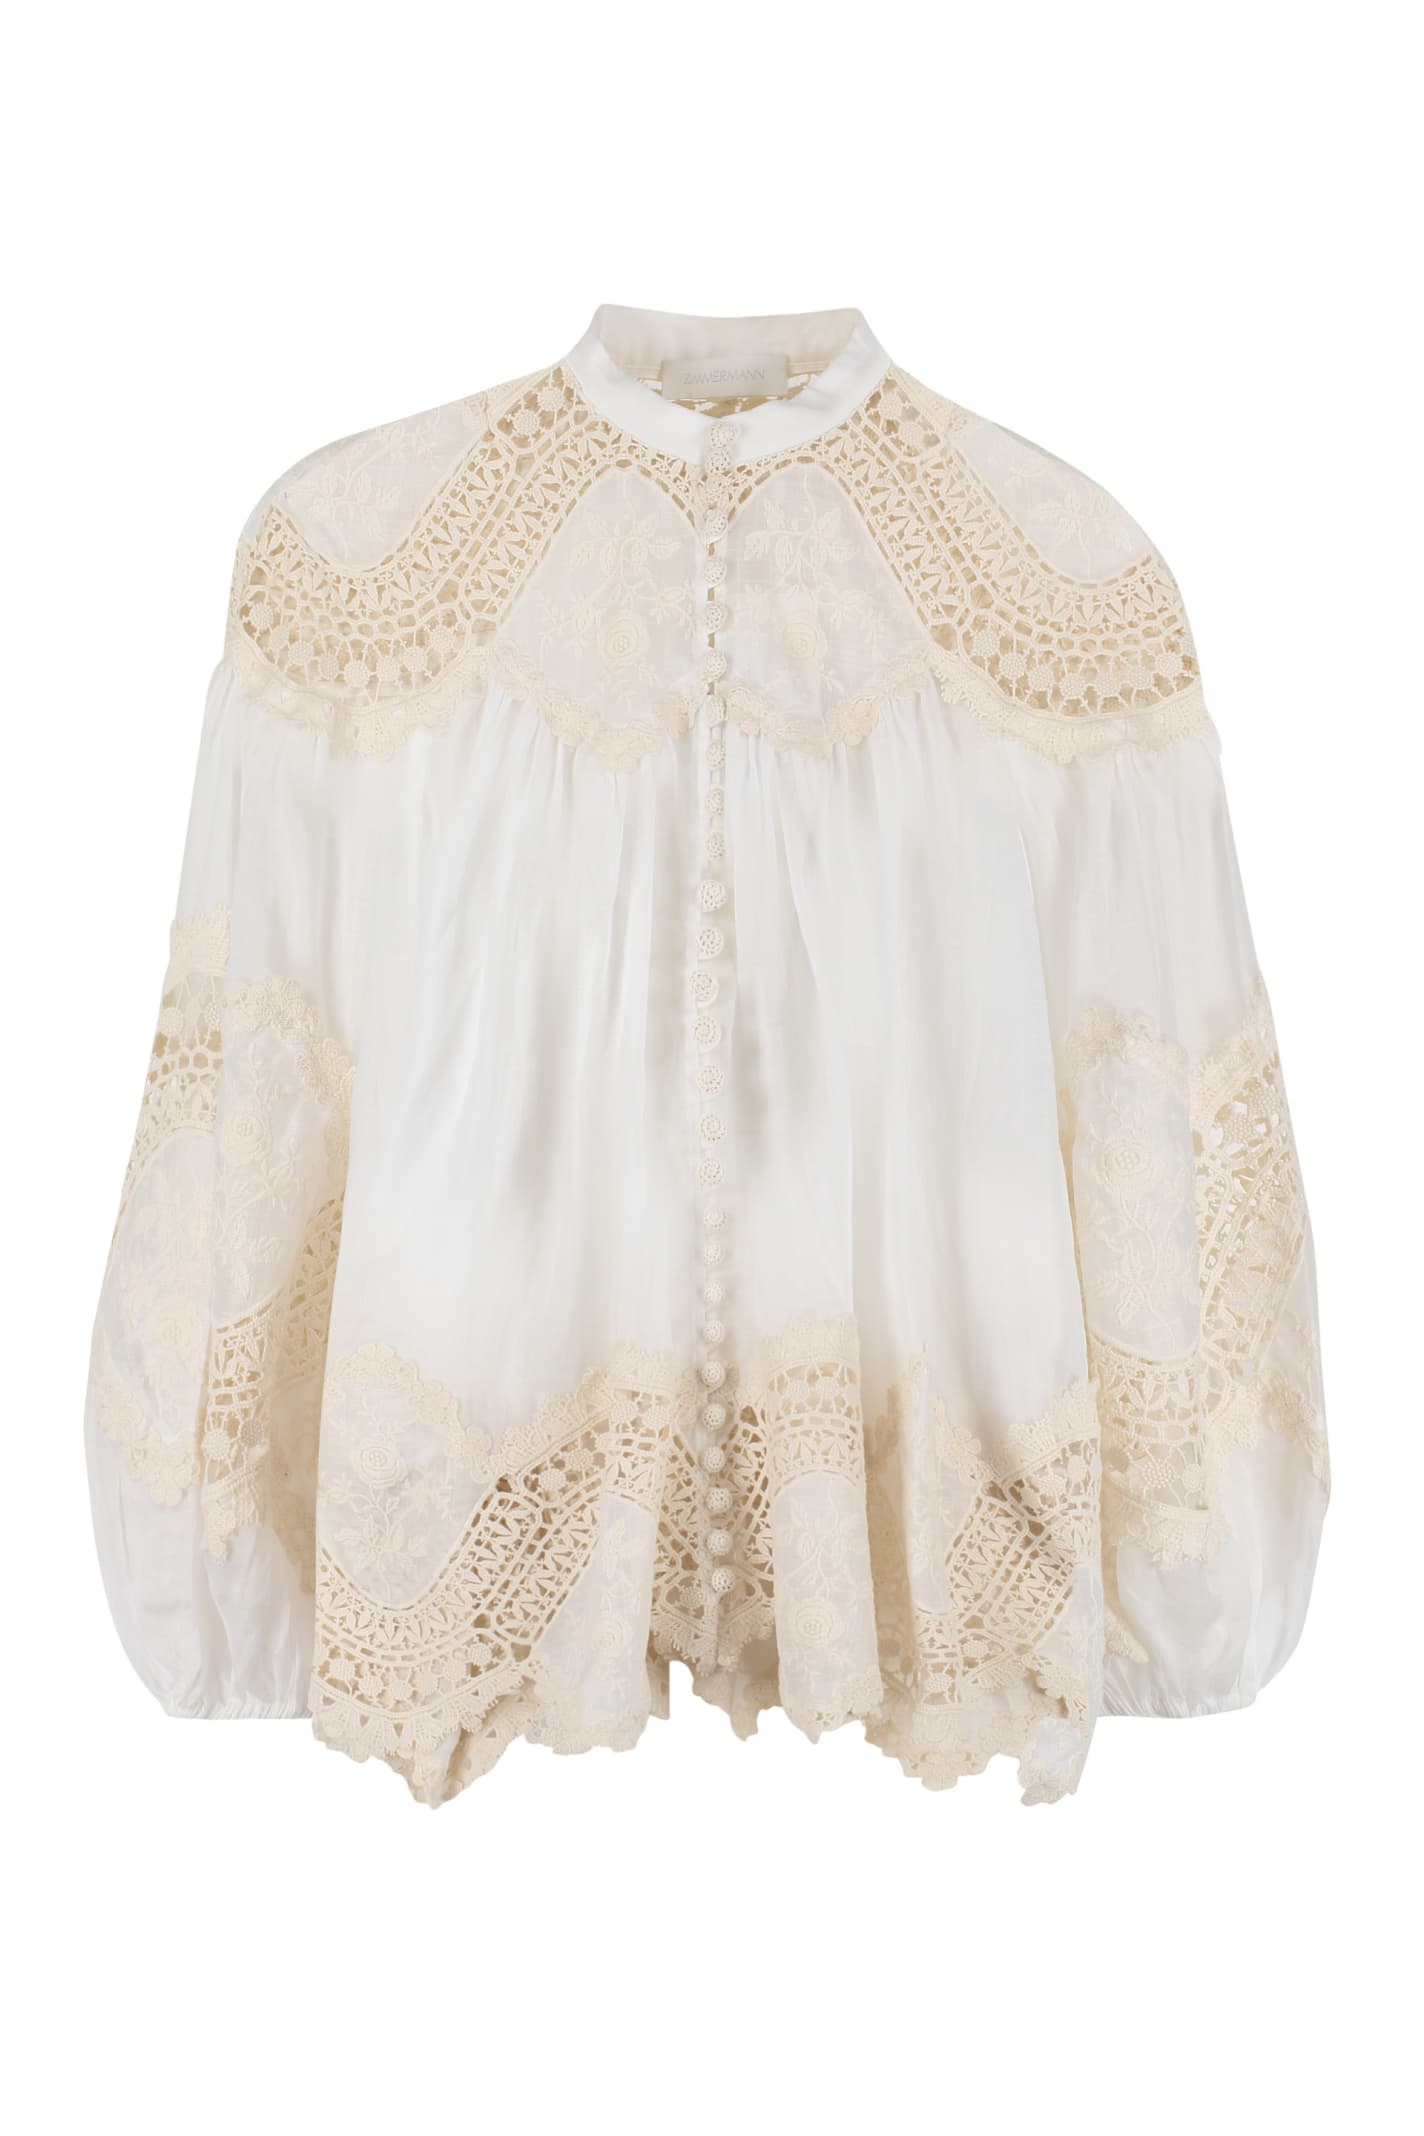 Zimmermann Embroidered Blouse